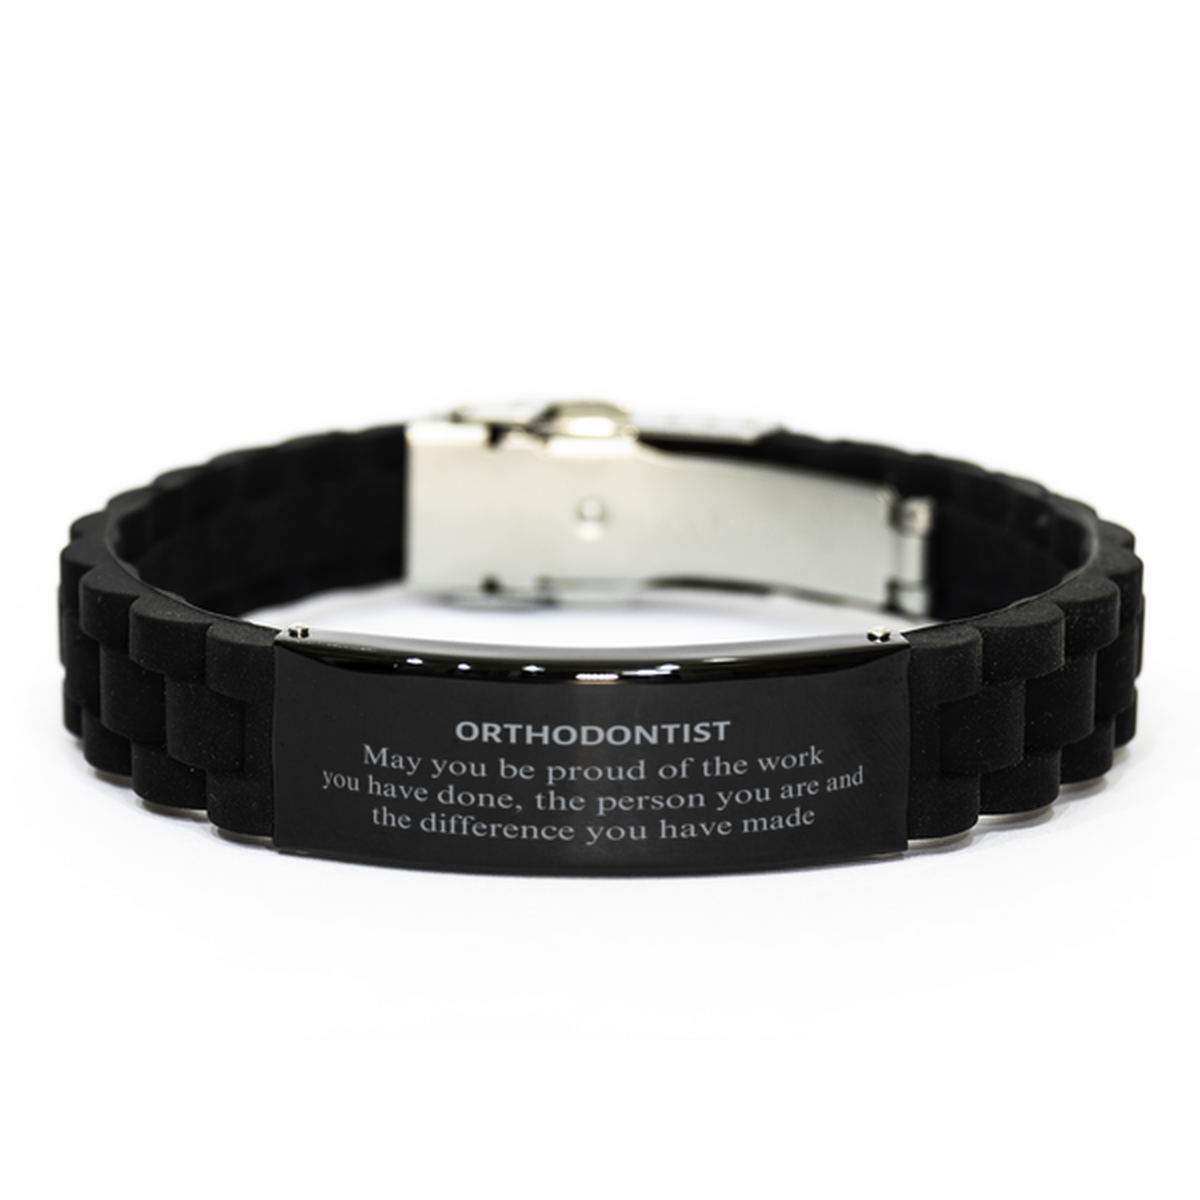 Orthodontist May you be proud of the work you have done, Retirement Orthodontist Black Glidelock Clasp Bracelet for Colleague Appreciation Gifts Amazing for Orthodontist